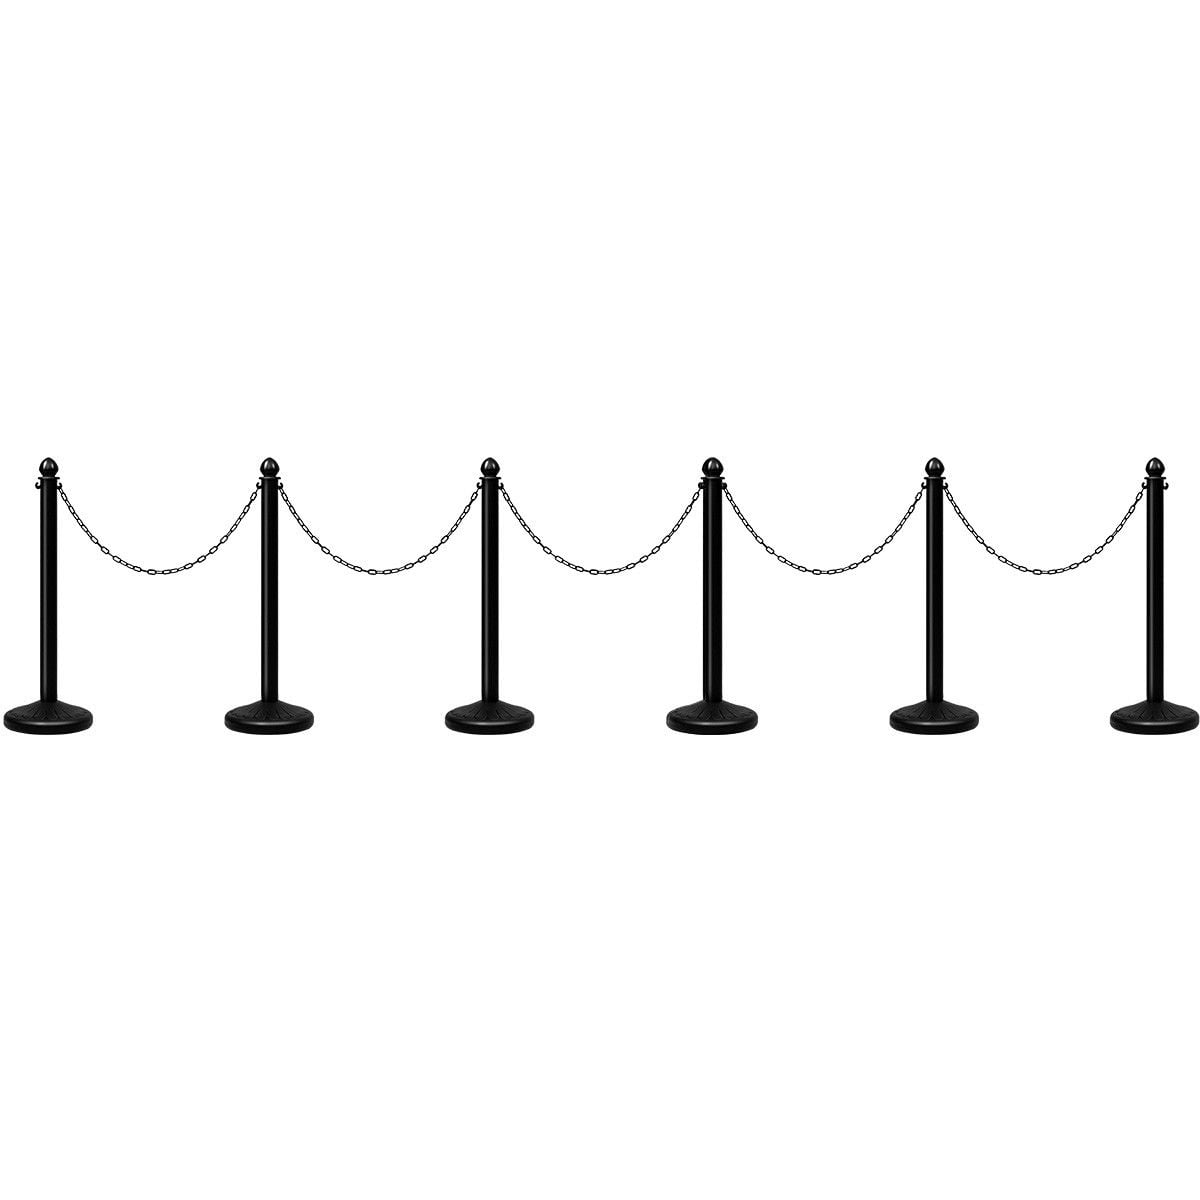 Easy Connect Assembly Goplus 6PCS Plastic Stanchion Set Perfect for Indoor & Outdoor Use C-Hooks & Fillable Base Stanchion Posts Queue Line Pole with 60” Link Chain Crowd Control Safety Barriers 